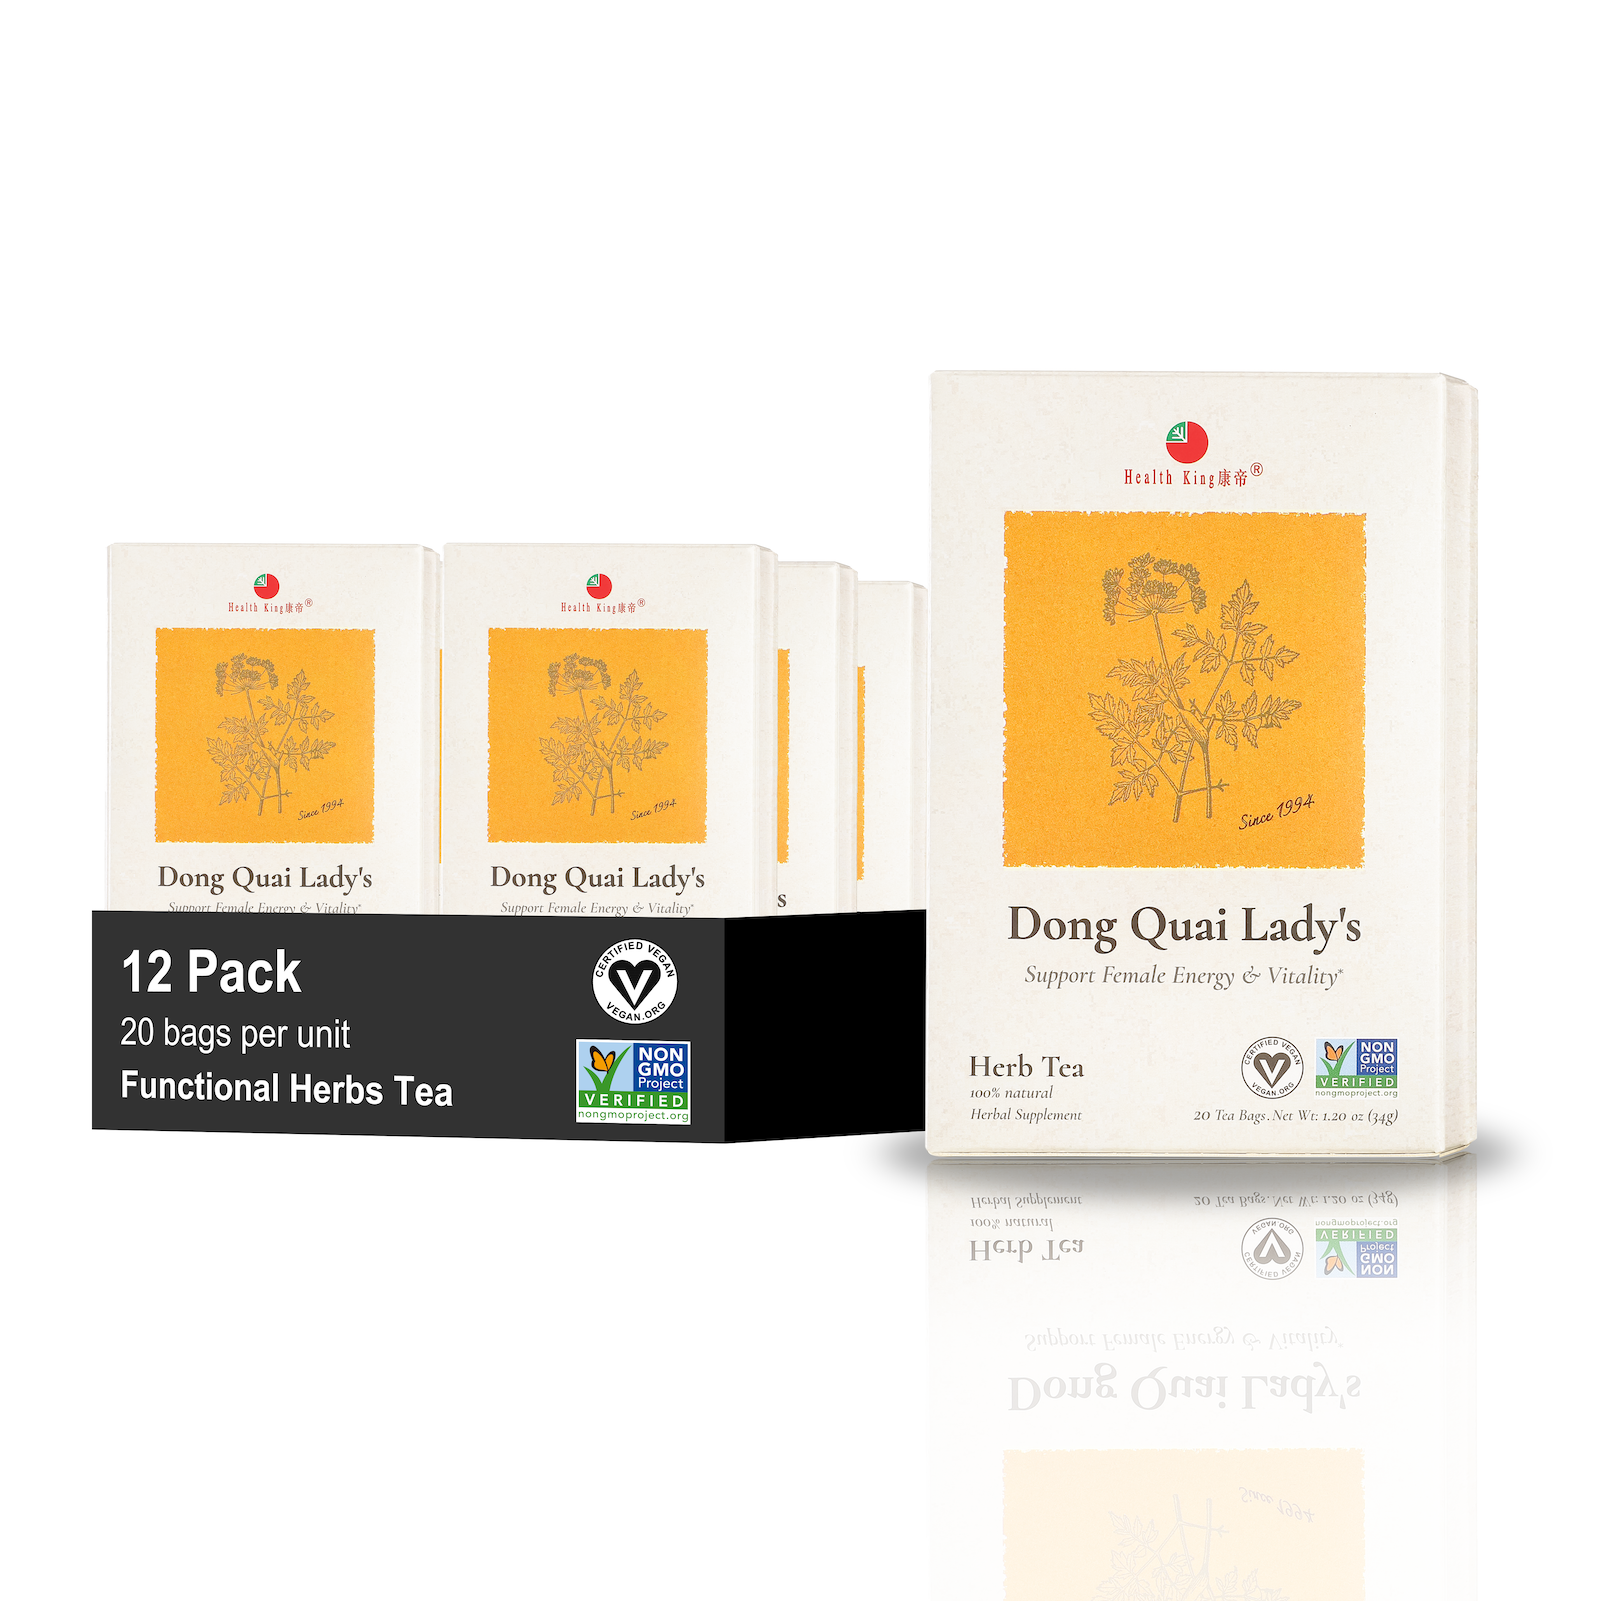 Twelve-pack of Dong Quai Lady's Herb Tea to promote female vitality